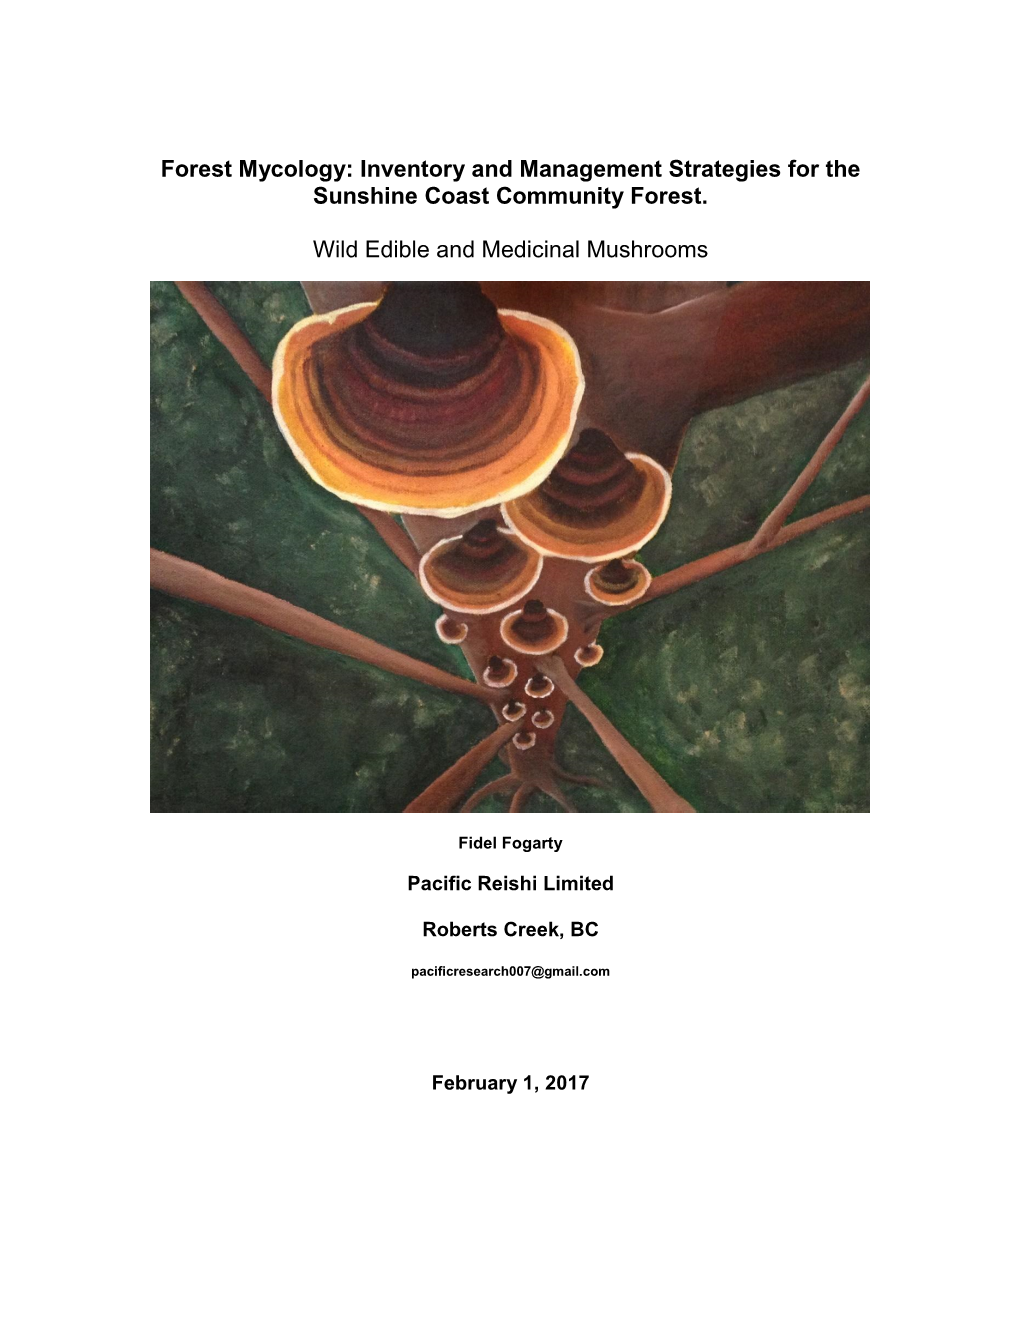 Forest Mycology: Inventory and Management Strategies for the Sunshine Coast Community Forest